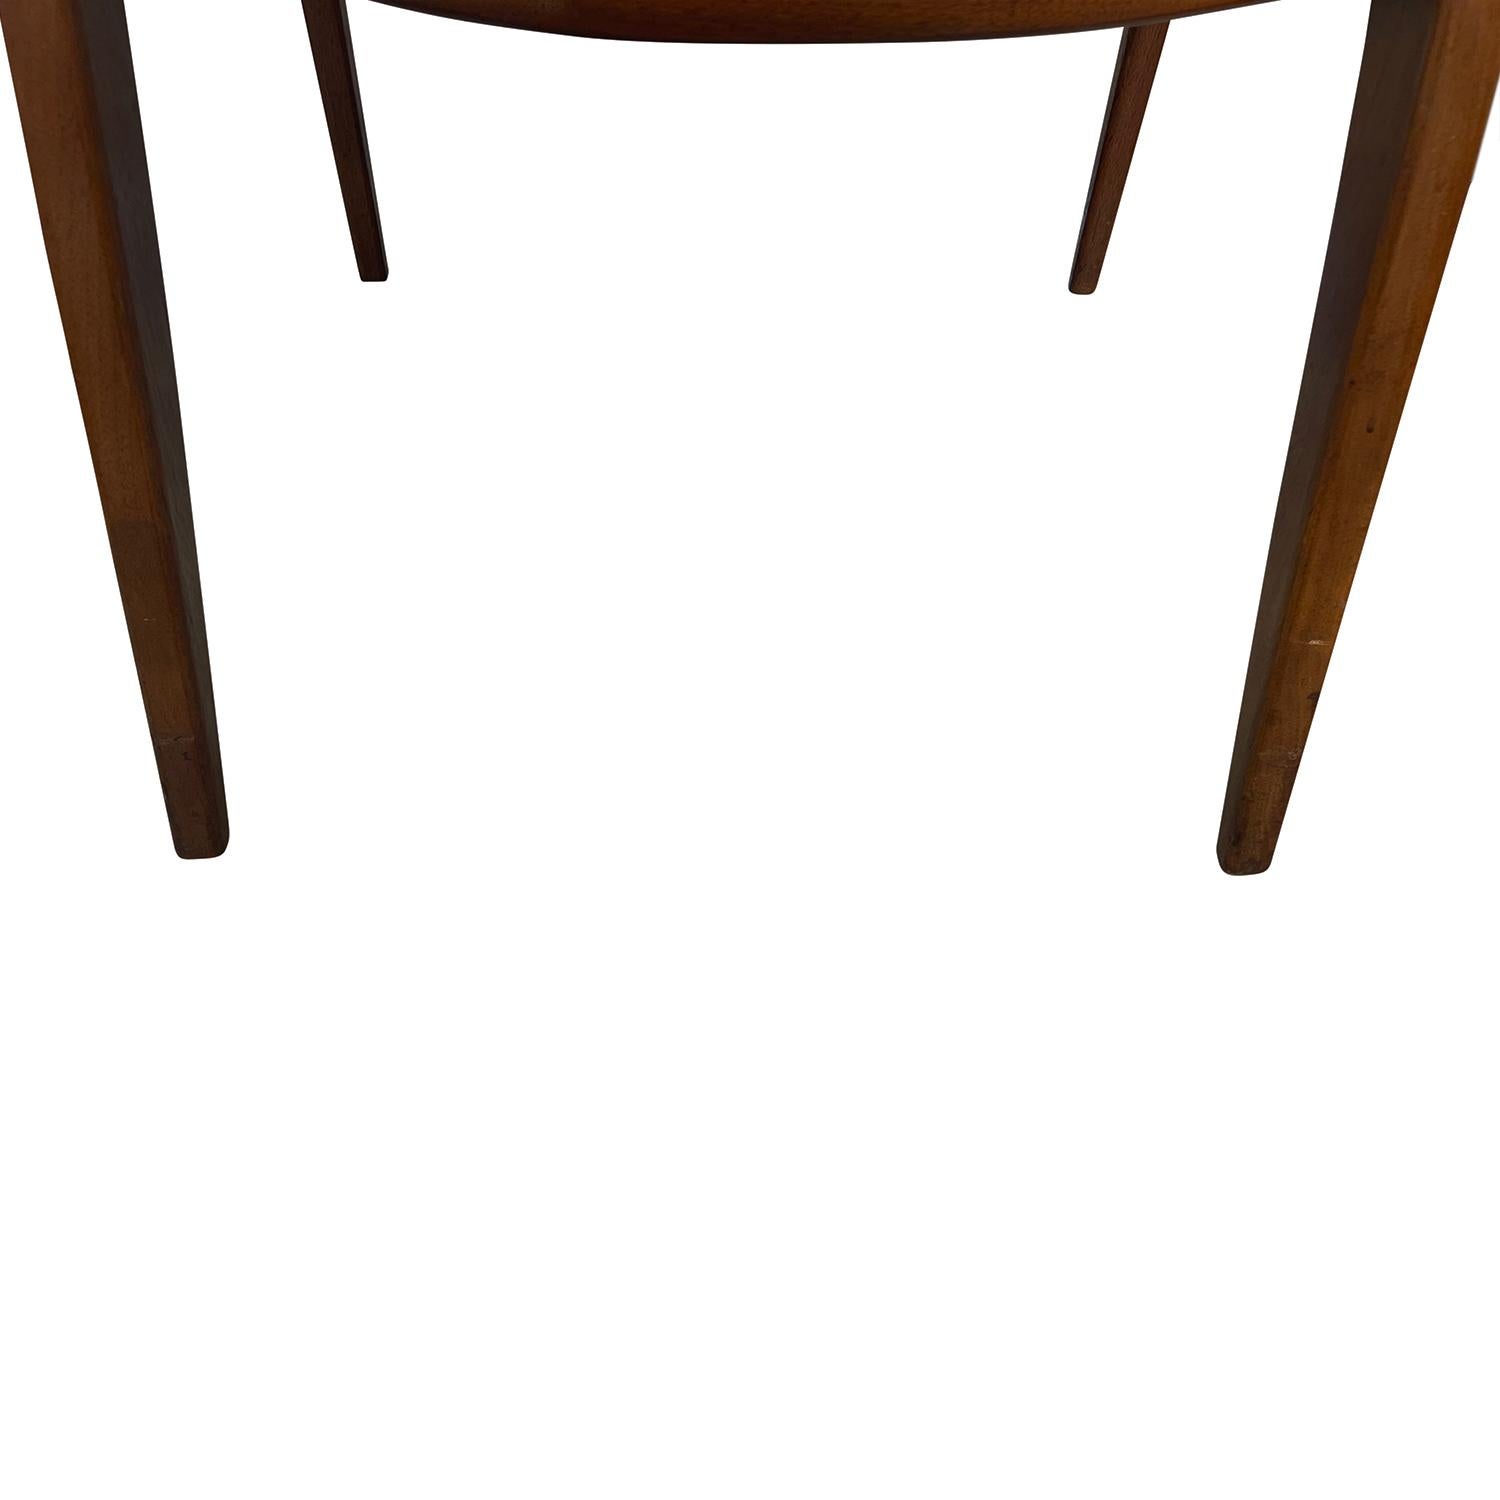 20th Century American Pair of Walnut Armchairs - Dining Chairs by John Stuart For Sale 4